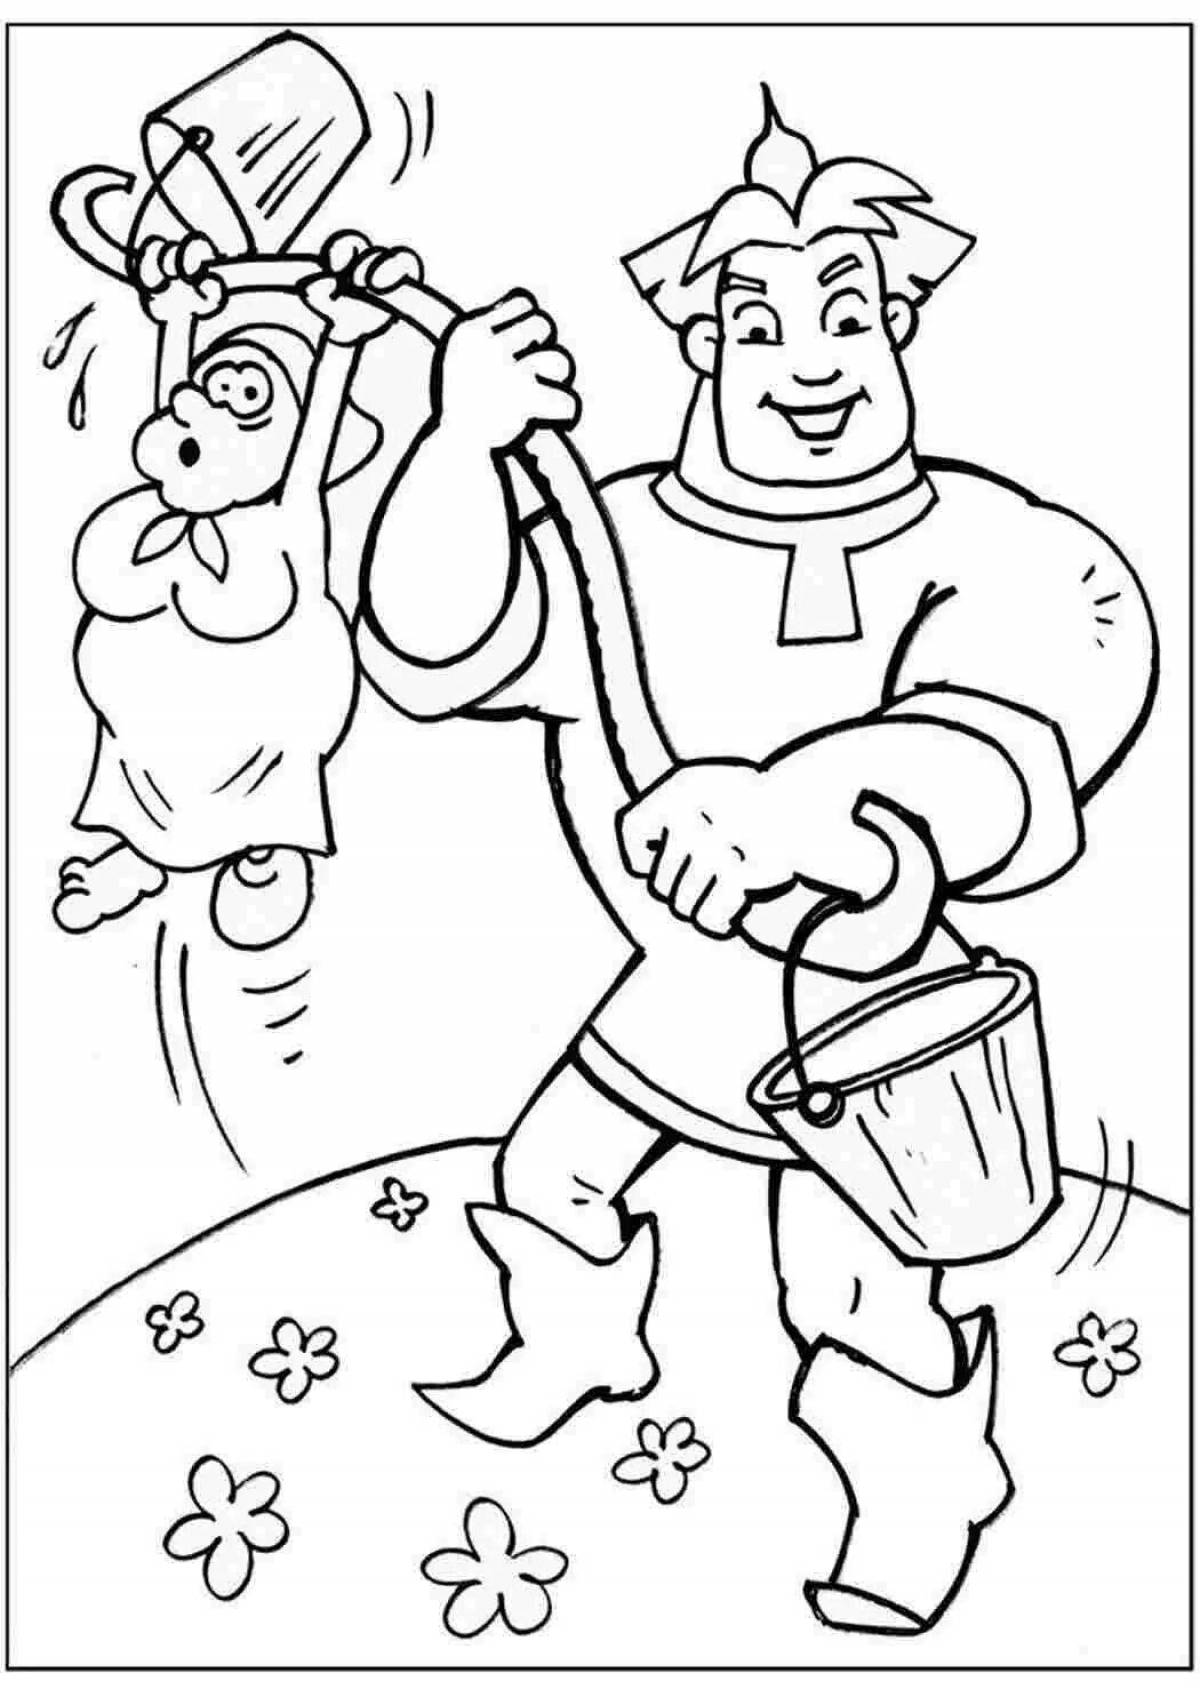 Attractive coloring page 3 heroes game